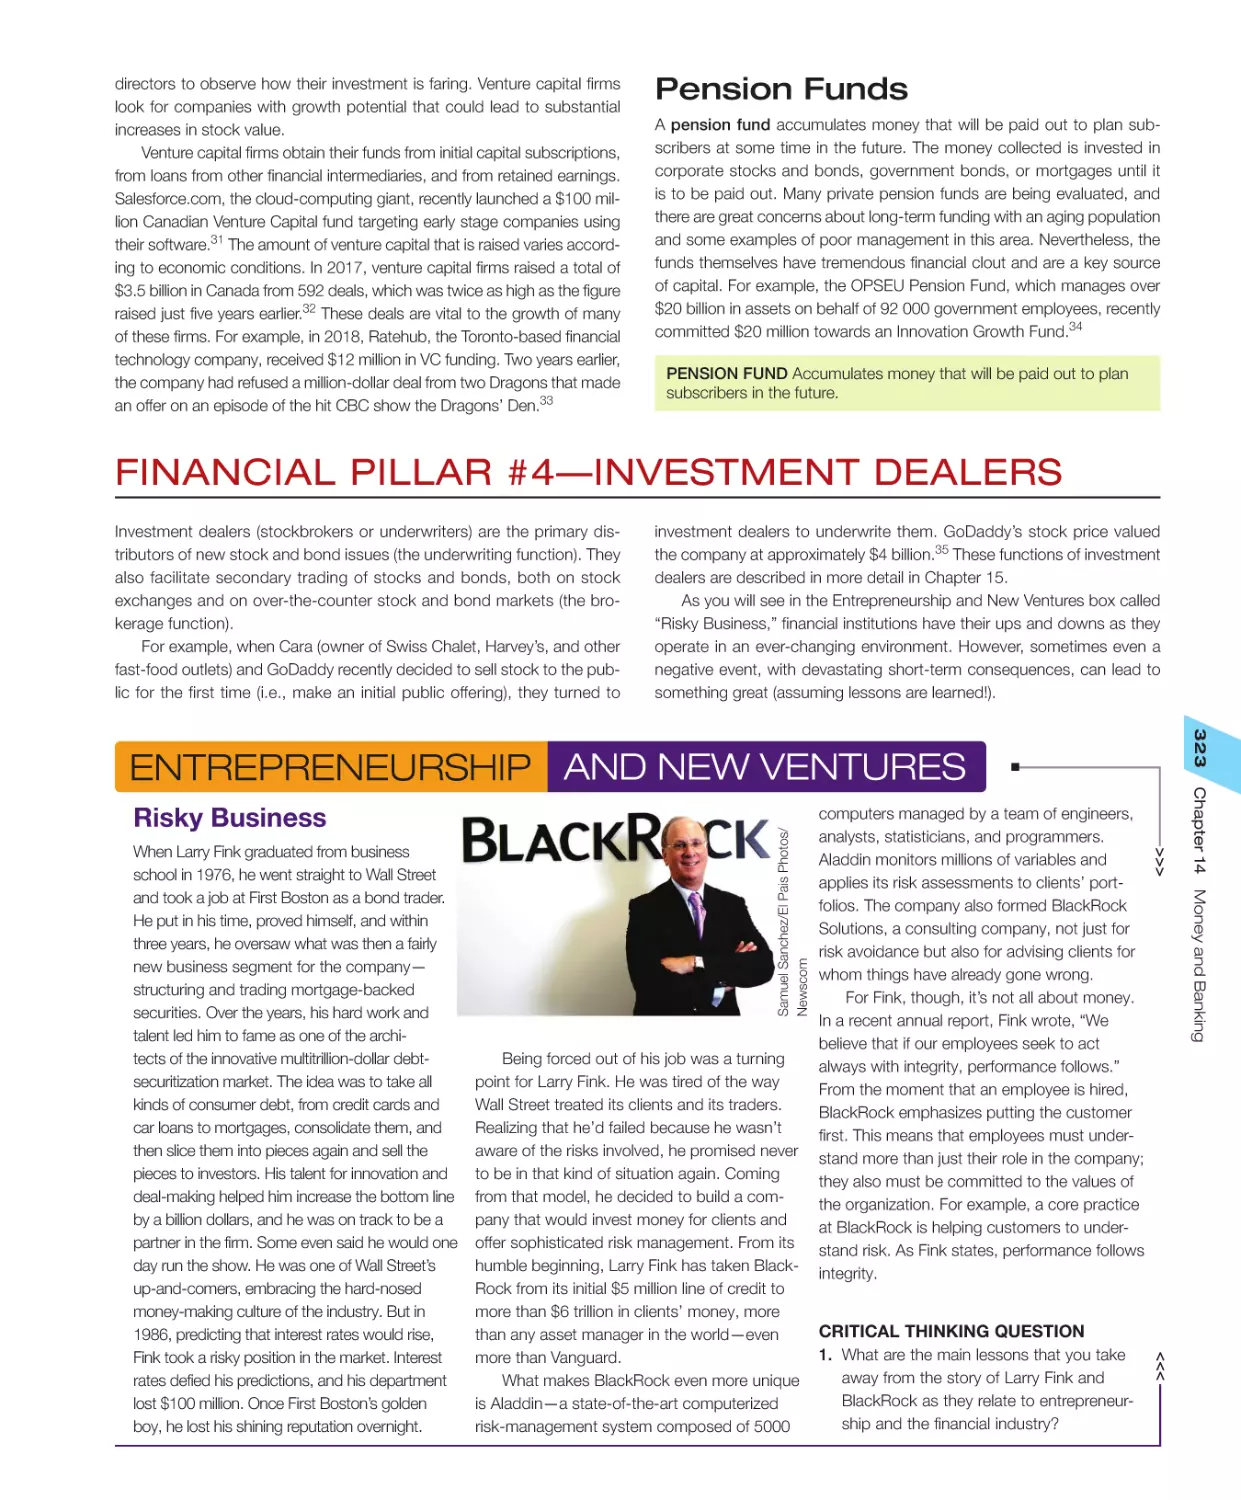 Pension Funds
Financial Pillar #4—Investment Dealers